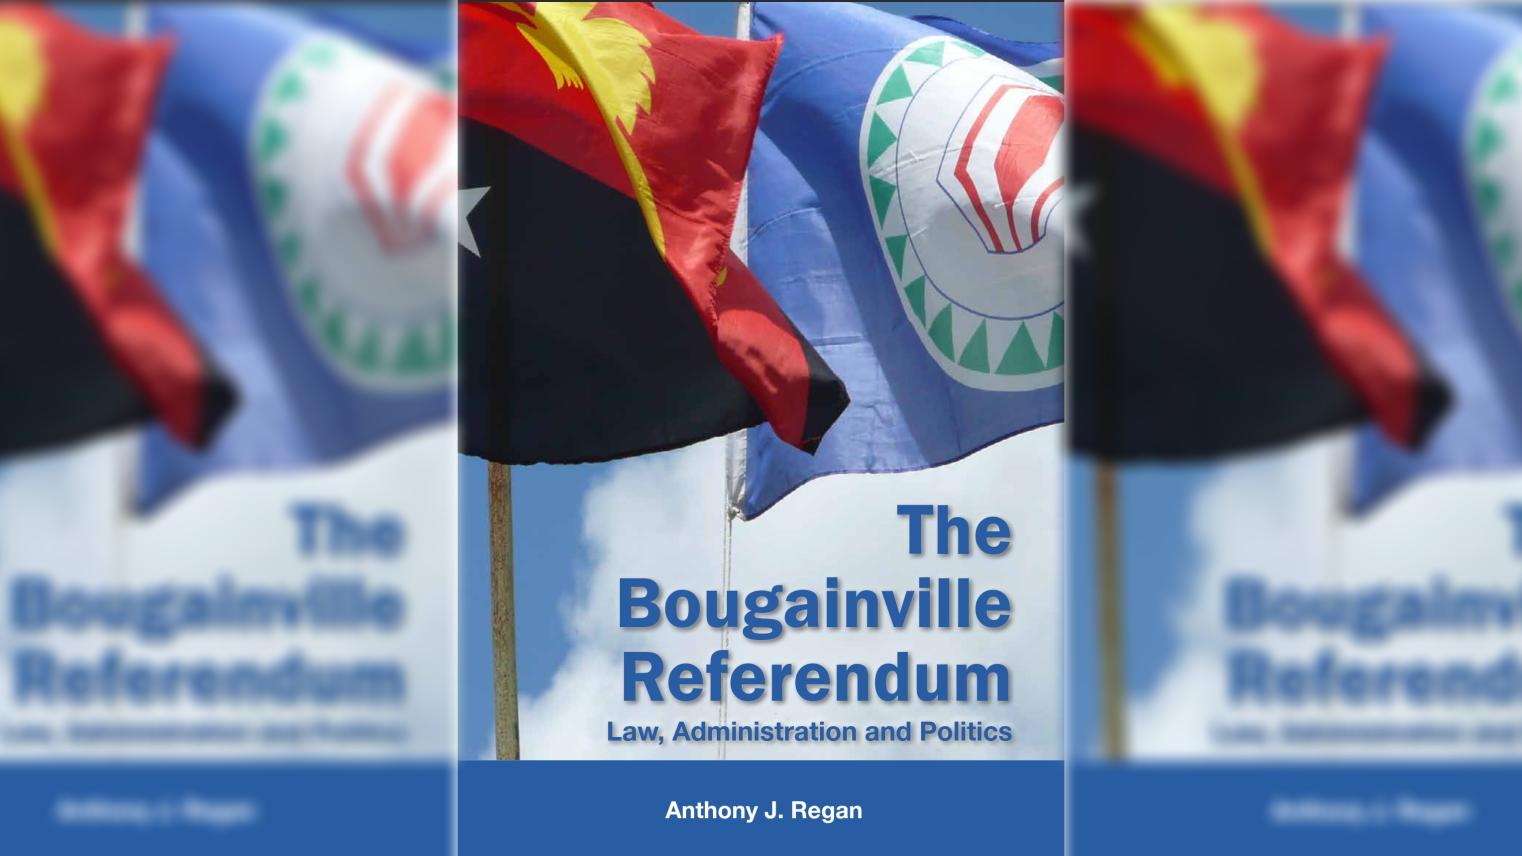 The Bougainville Referendum: Law, Administration and Politics